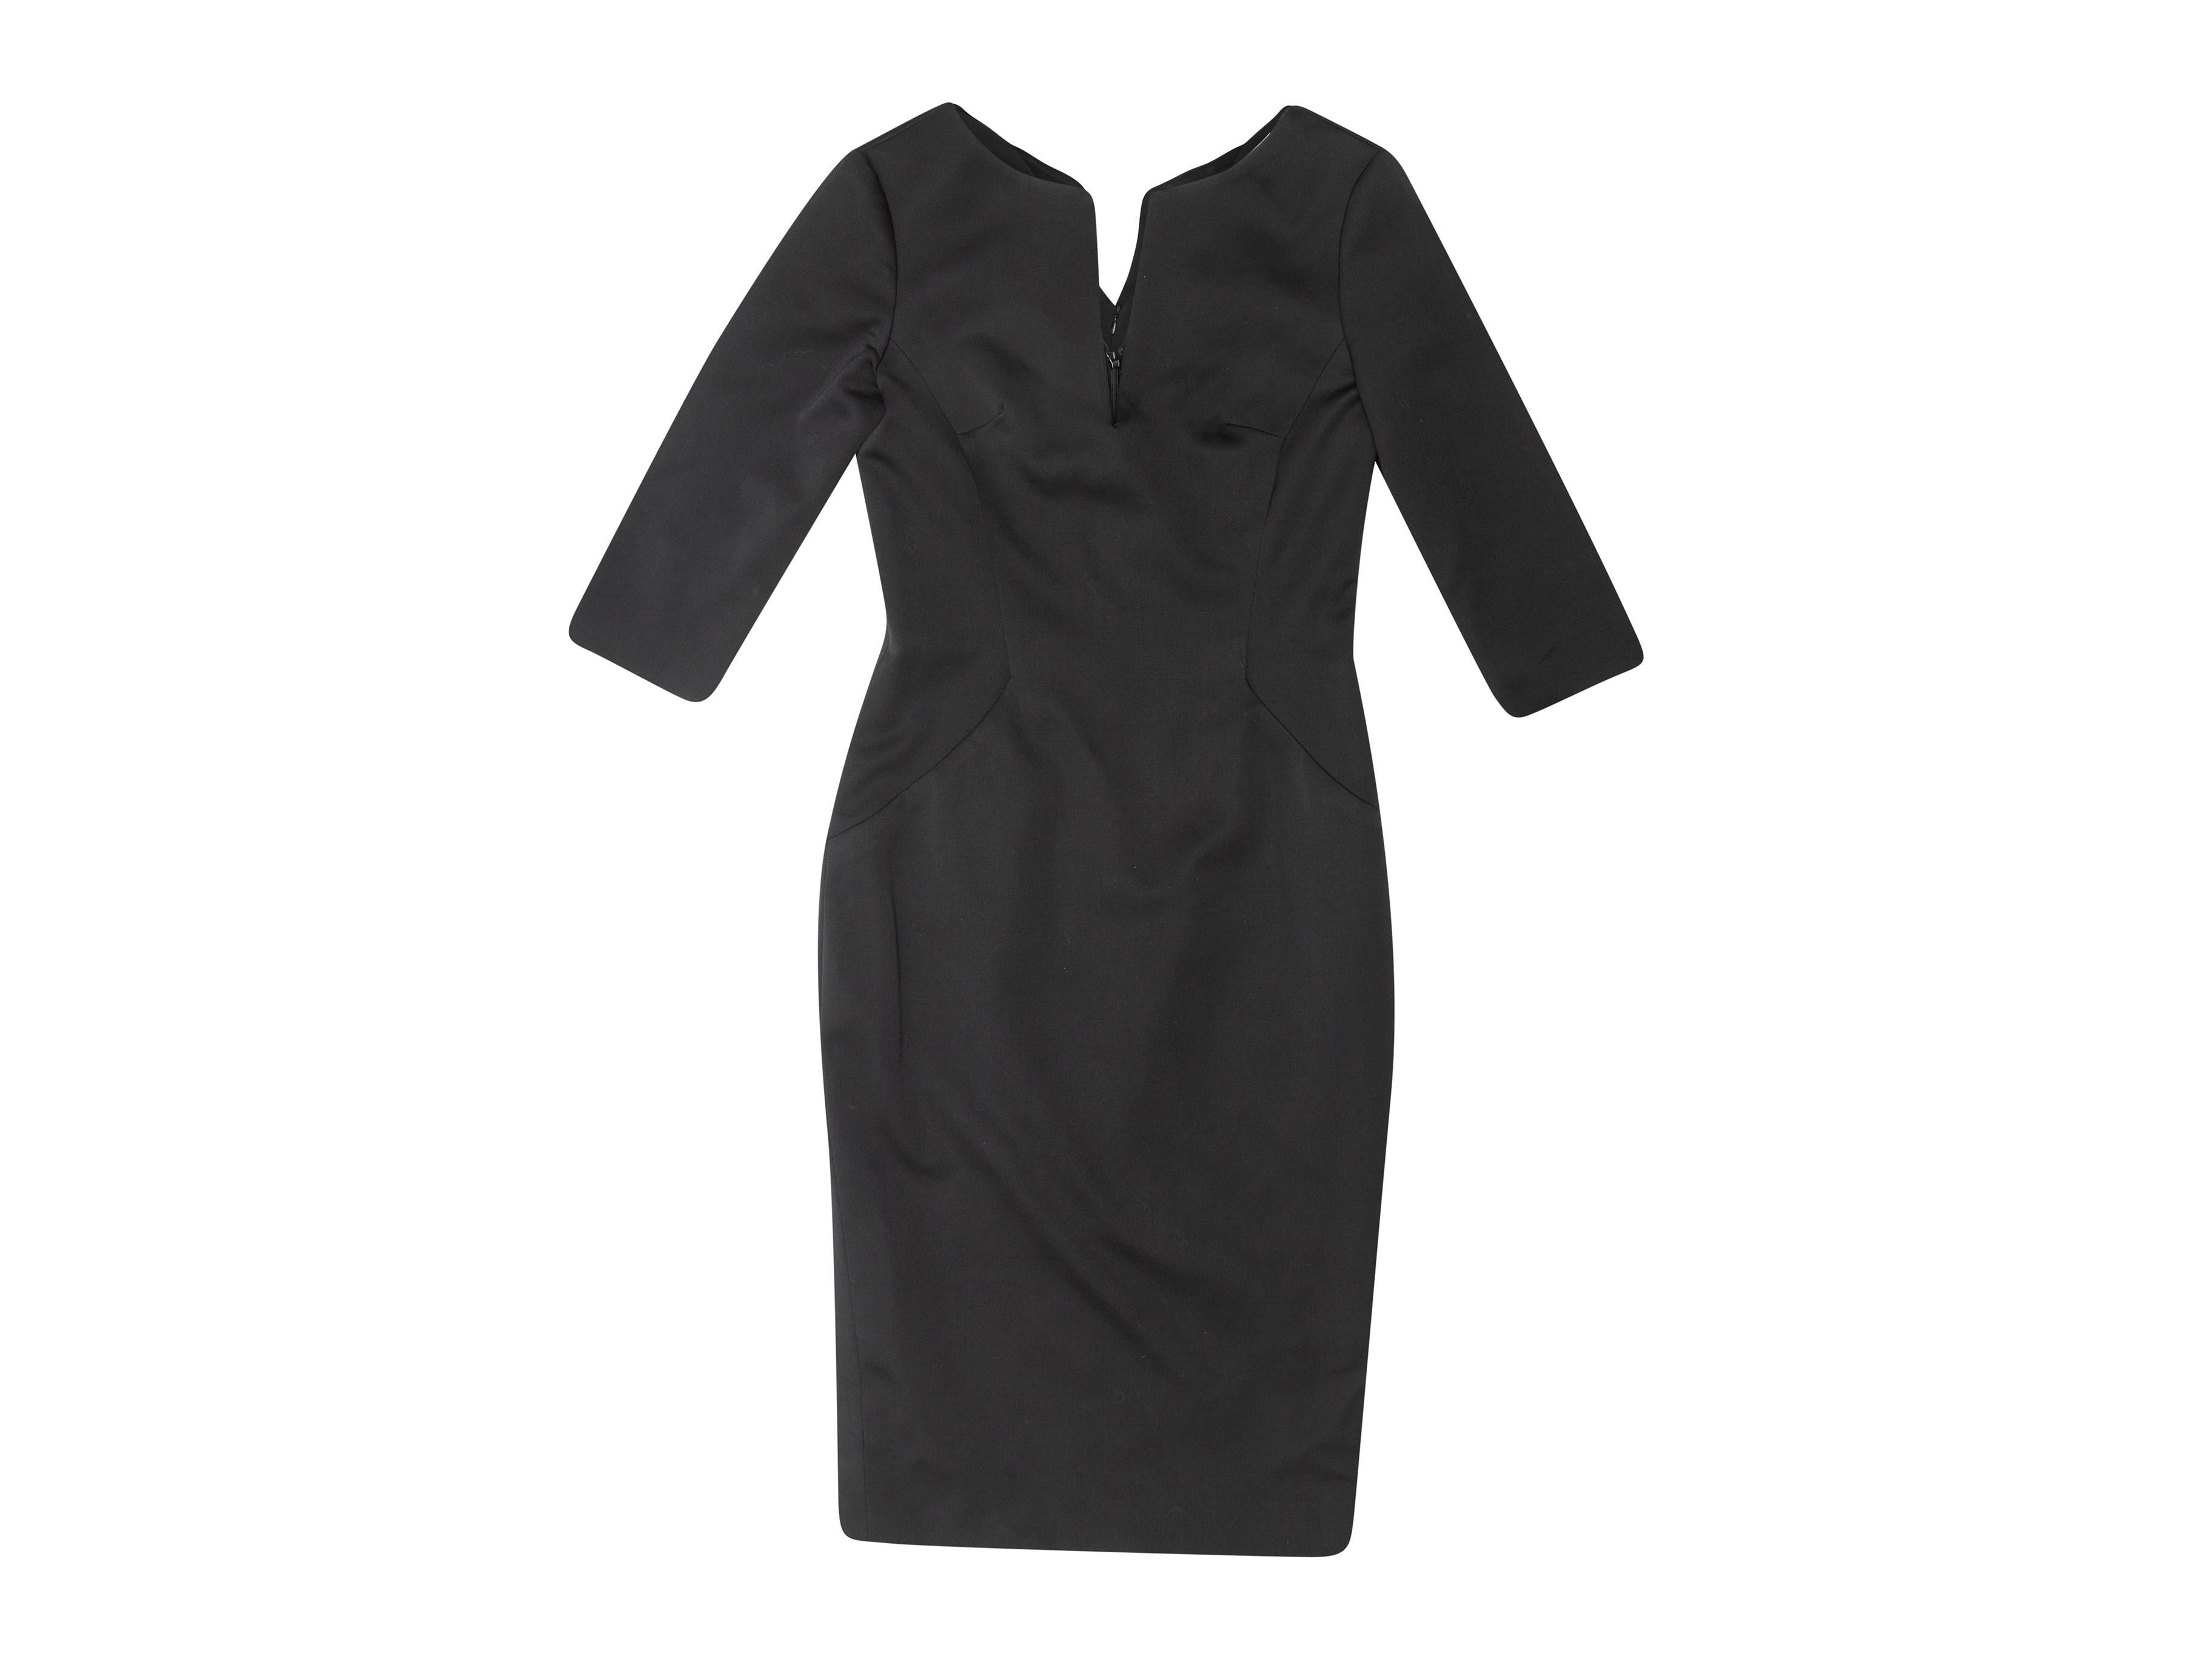 Product details: Black fitted dress by Alexander McQueen. V-neck. Three-quarter length sleeves. Zip closure at back. 42